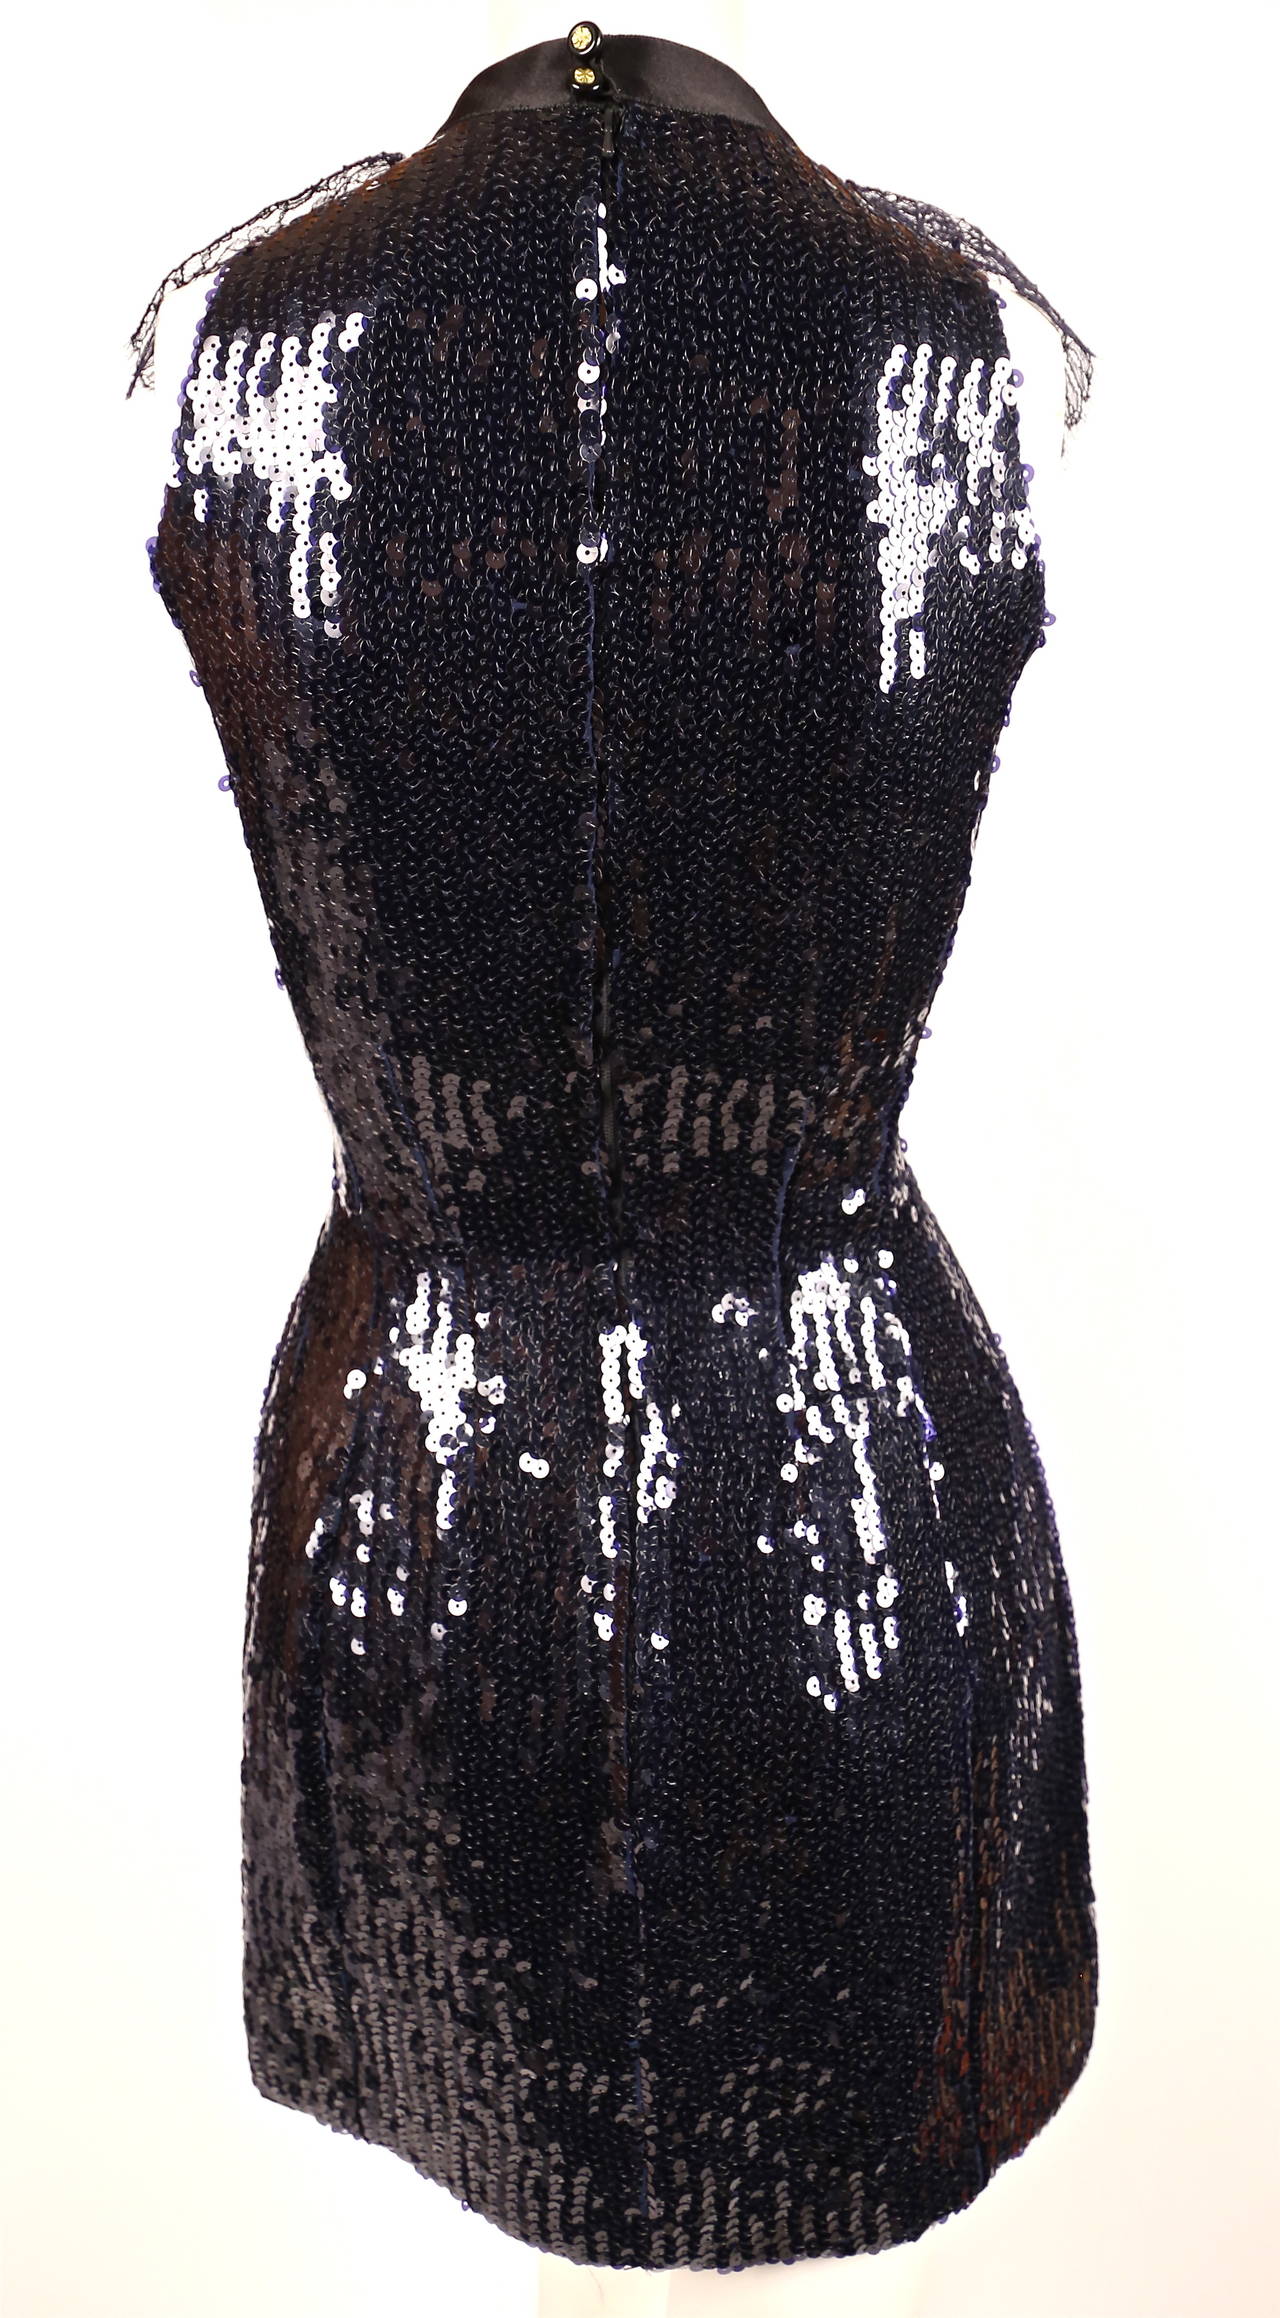 1987 CHANEL navy blue sequined mini dress with chantilly lace collar & satin bow 2